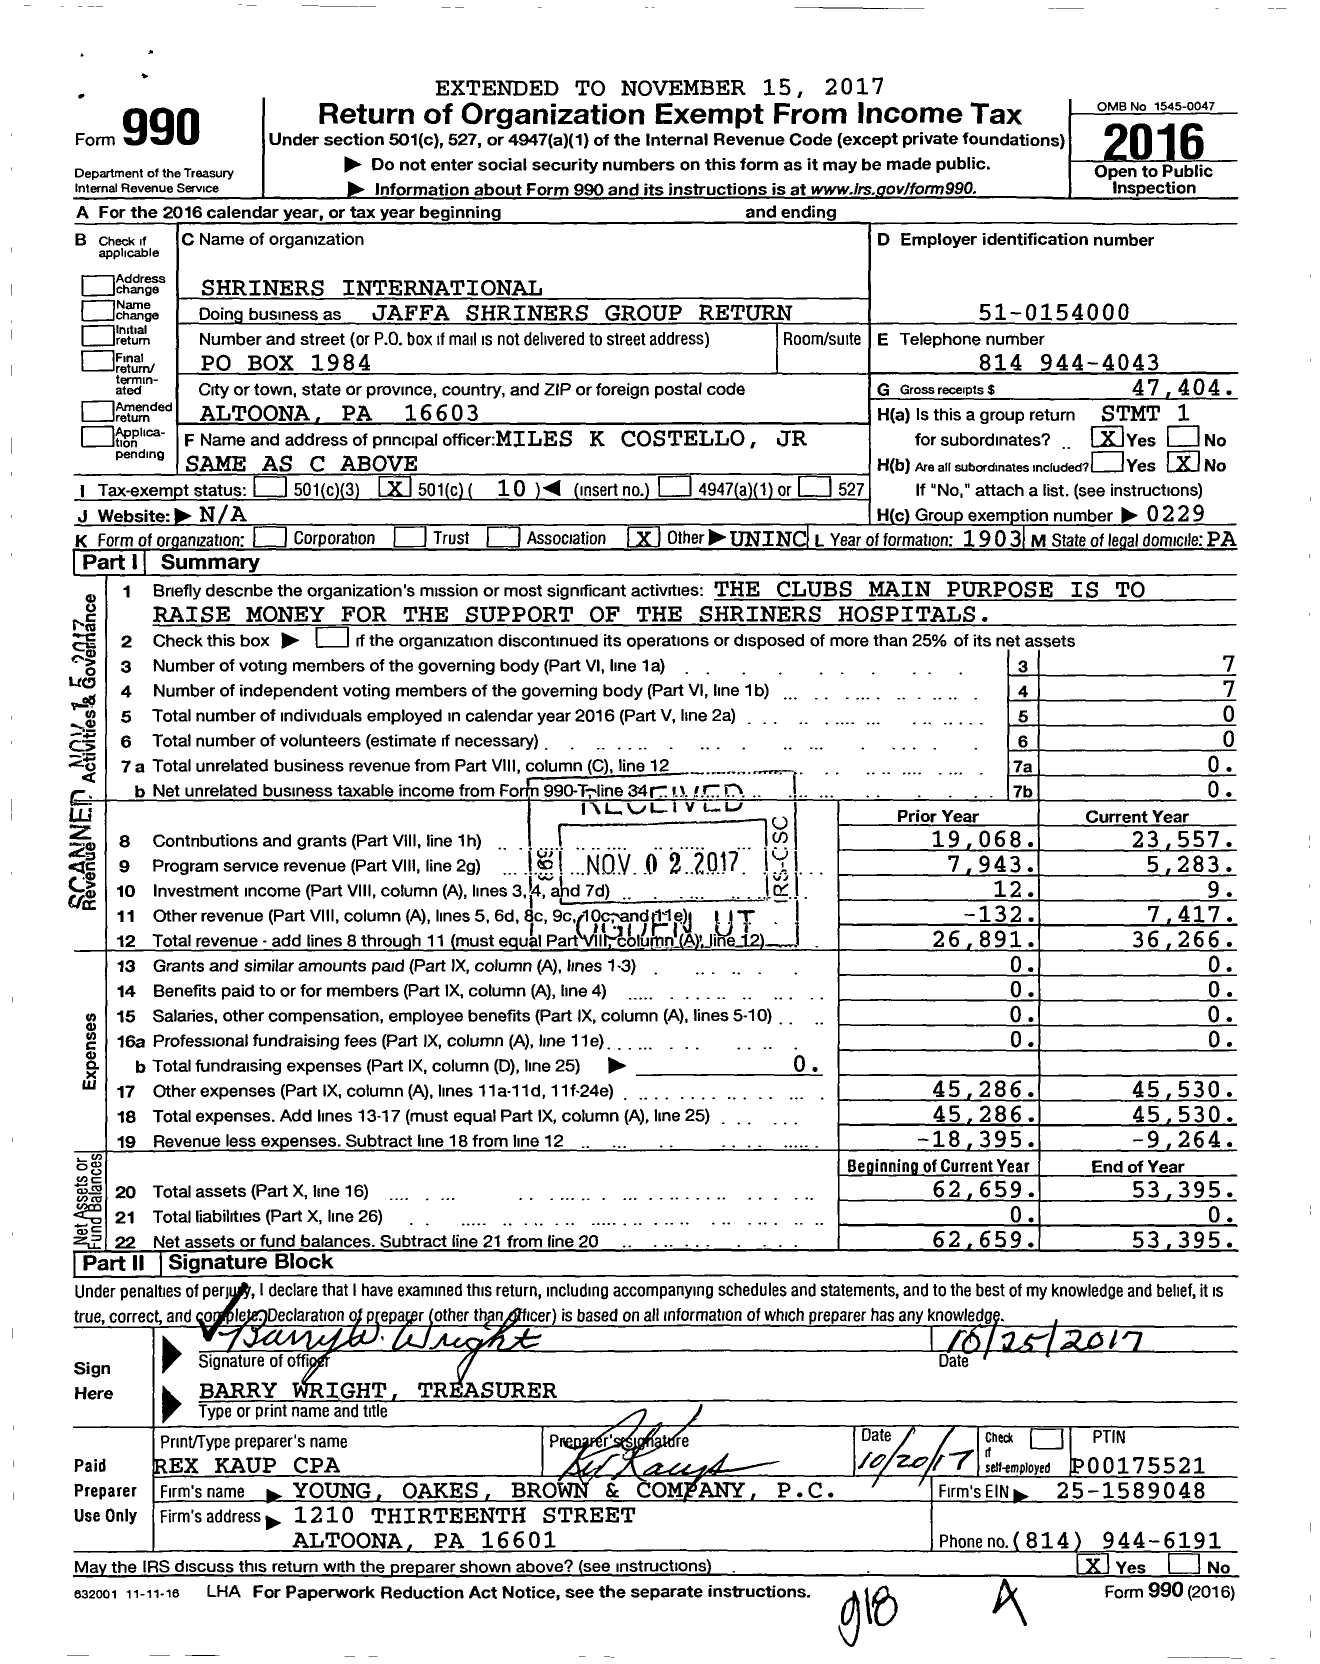 Image of first page of 2016 Form 990O for Shriners International - Jaffa Shriners Group Return